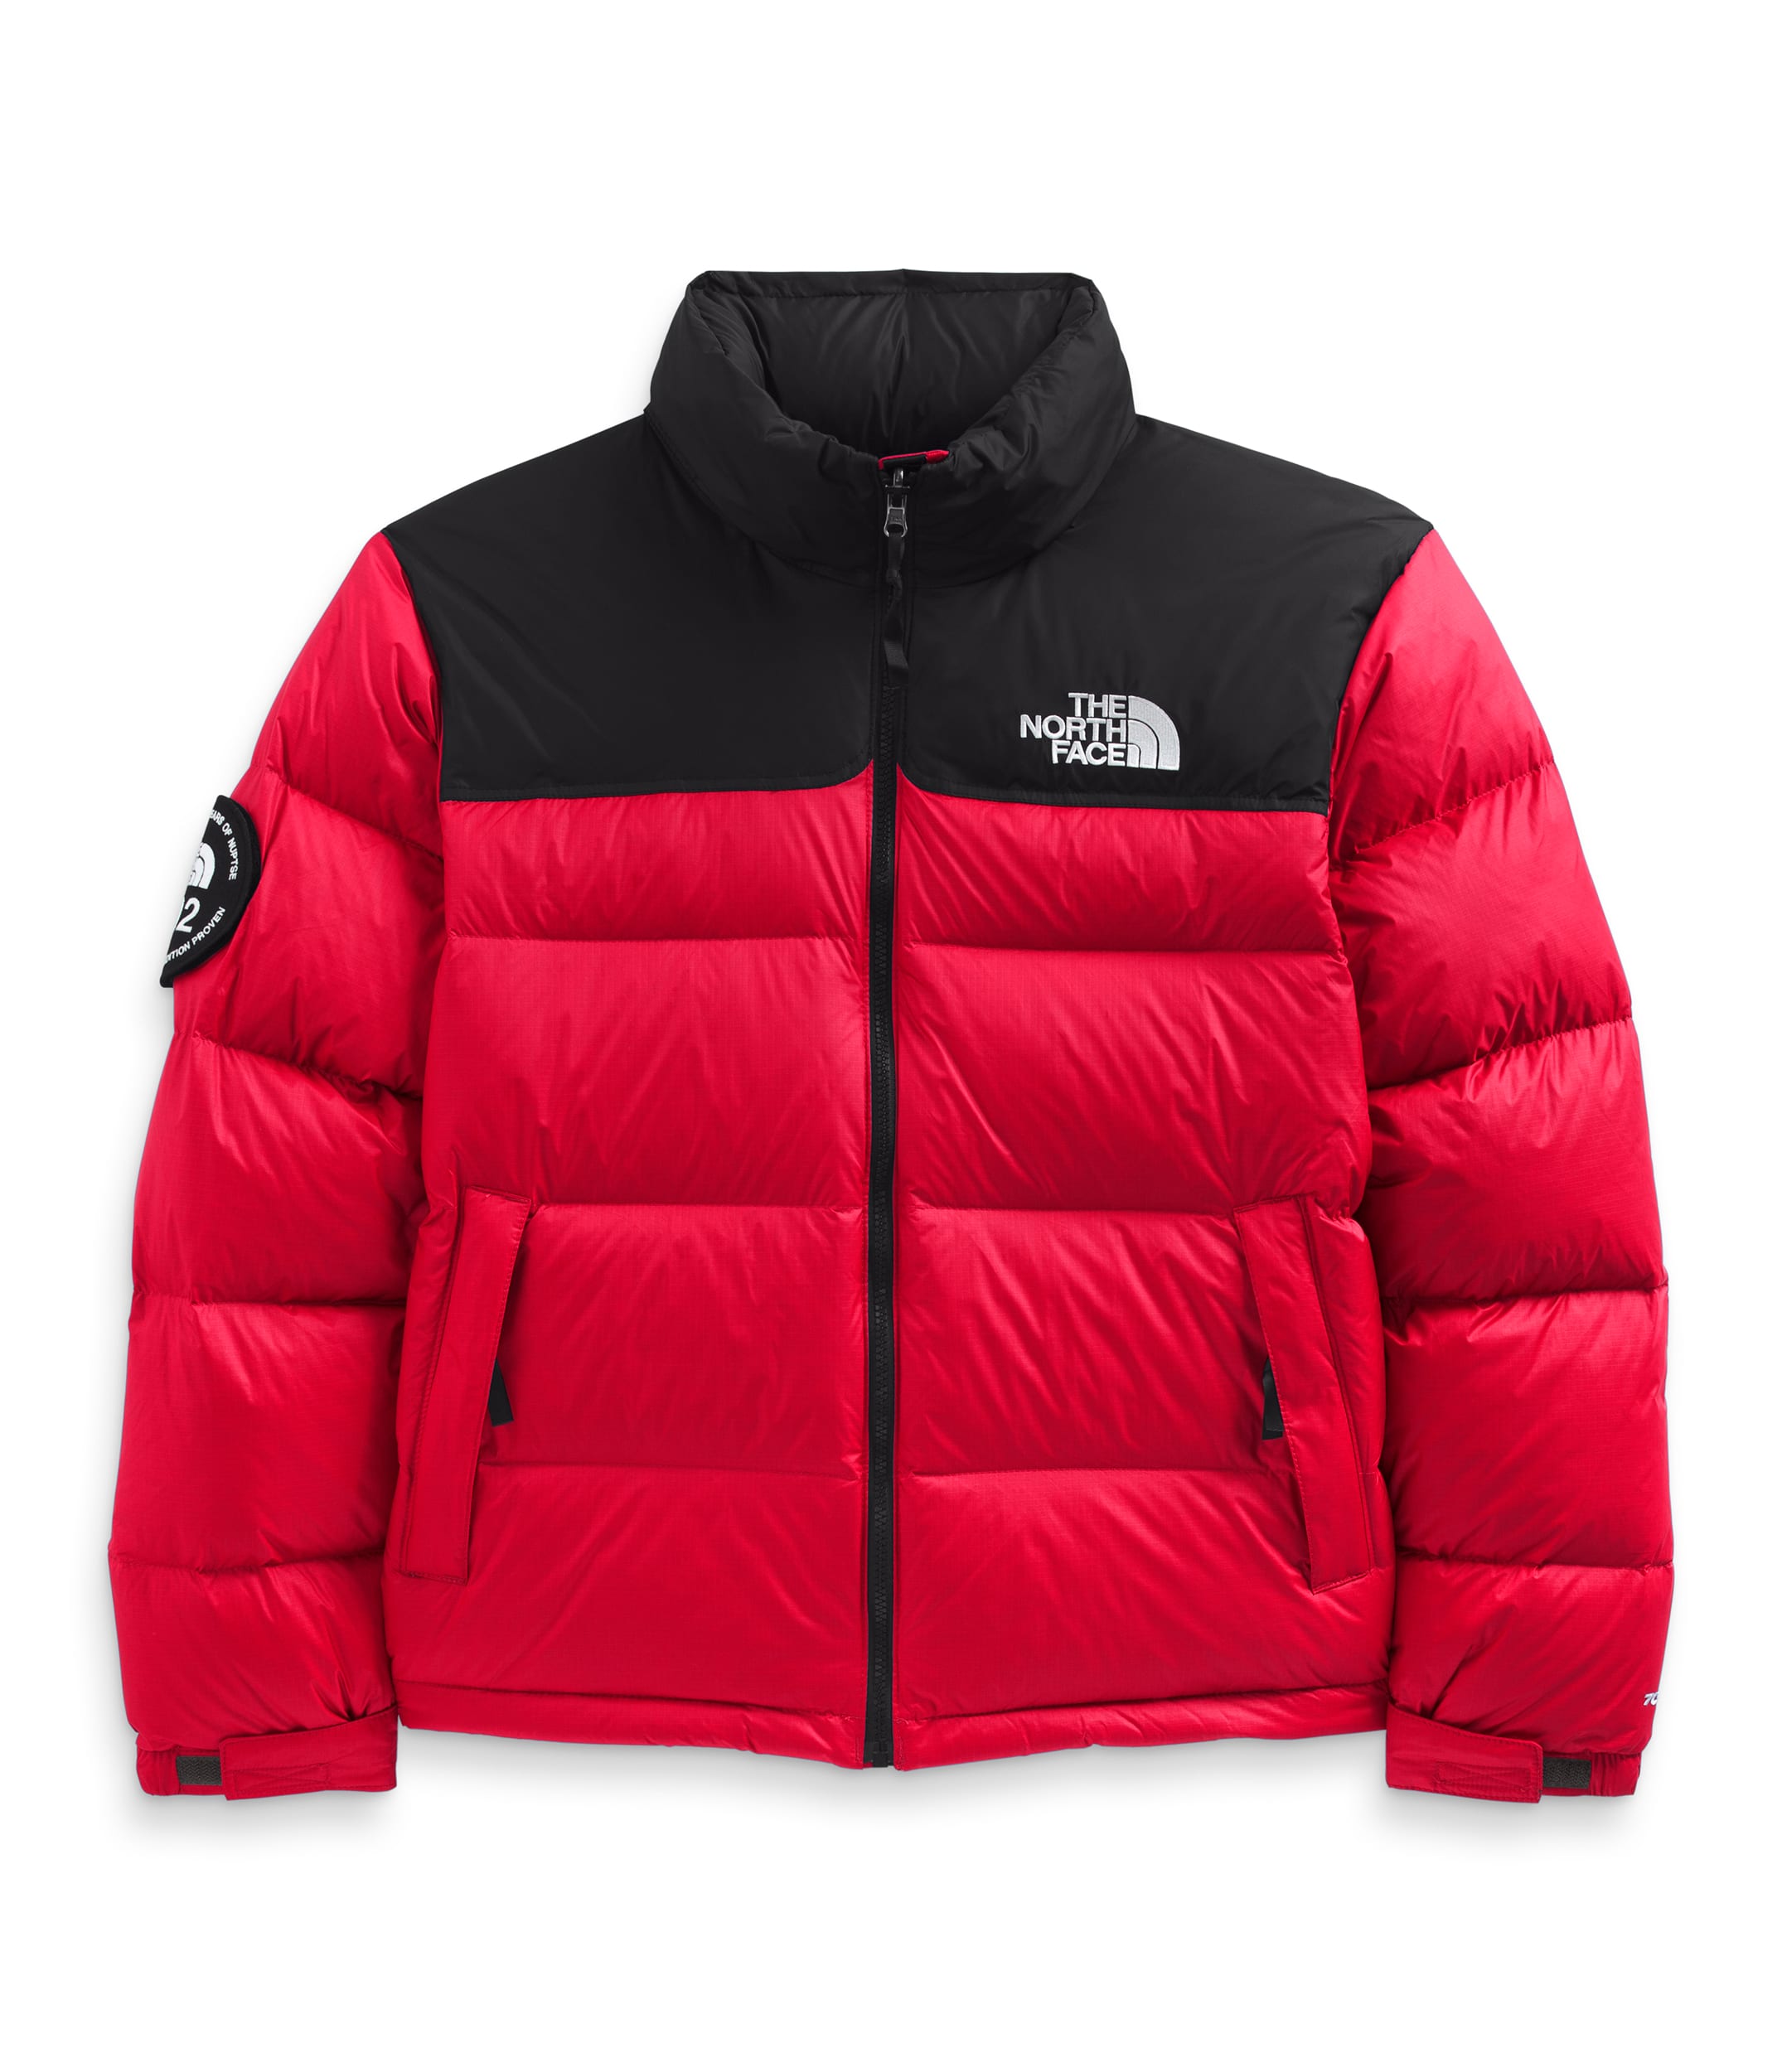 Nuptse jacket North Face in red